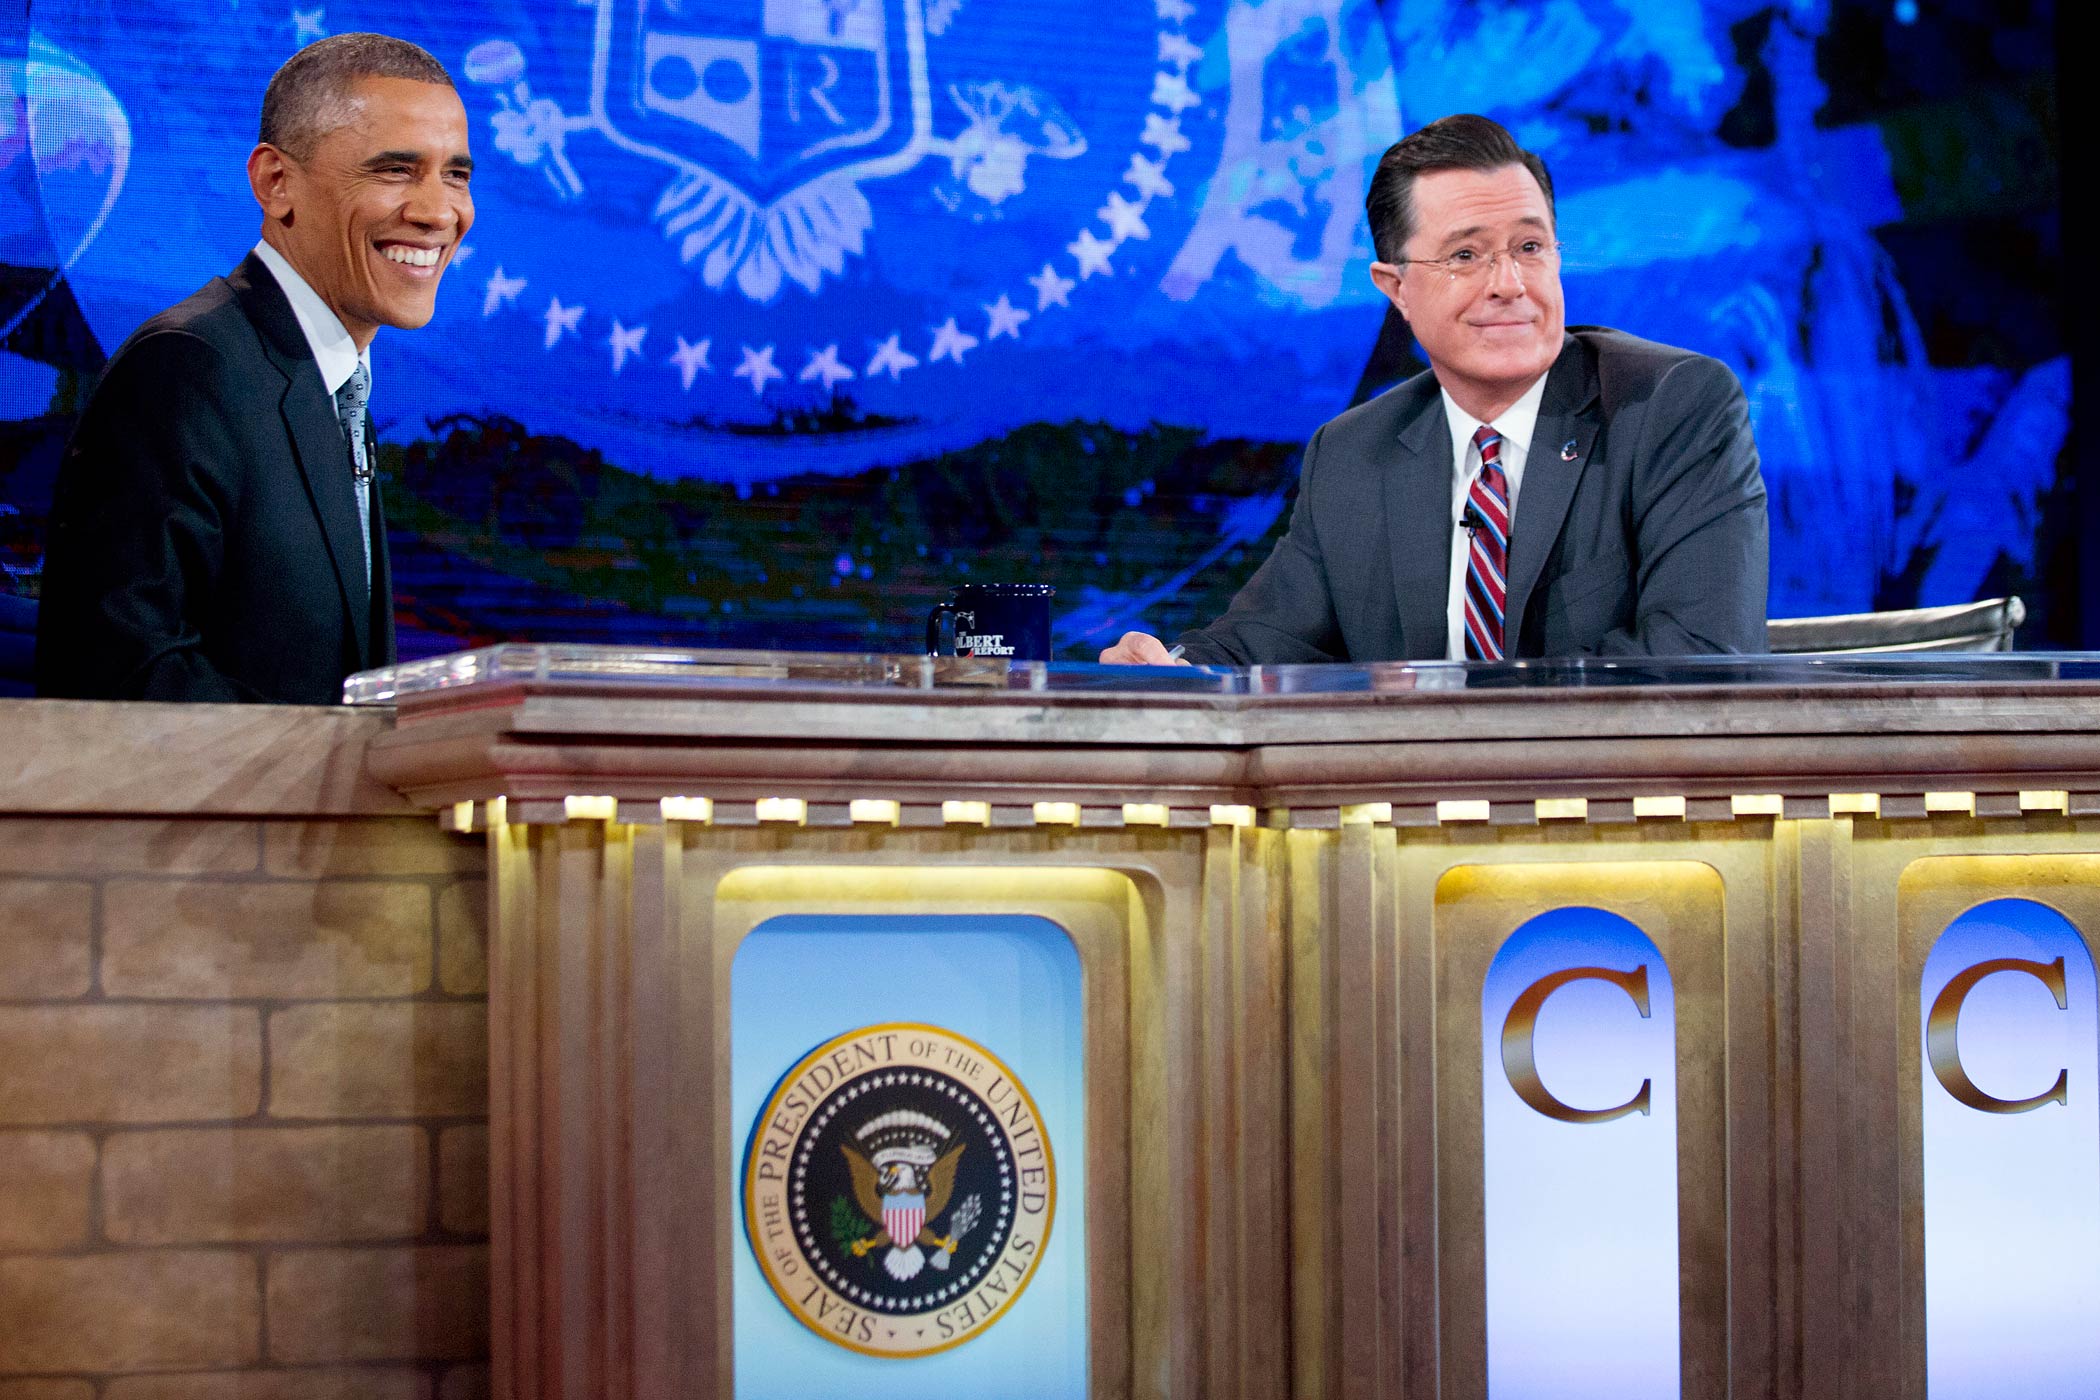 President Barack Obama talks to Stephen Colbert during a taping of <i>The Colbert Report</i> in Lisner Auditorium at George Washington University on Dec. 8, 2014 in Washington, DC. (Andrew Harrer—Getty Images)